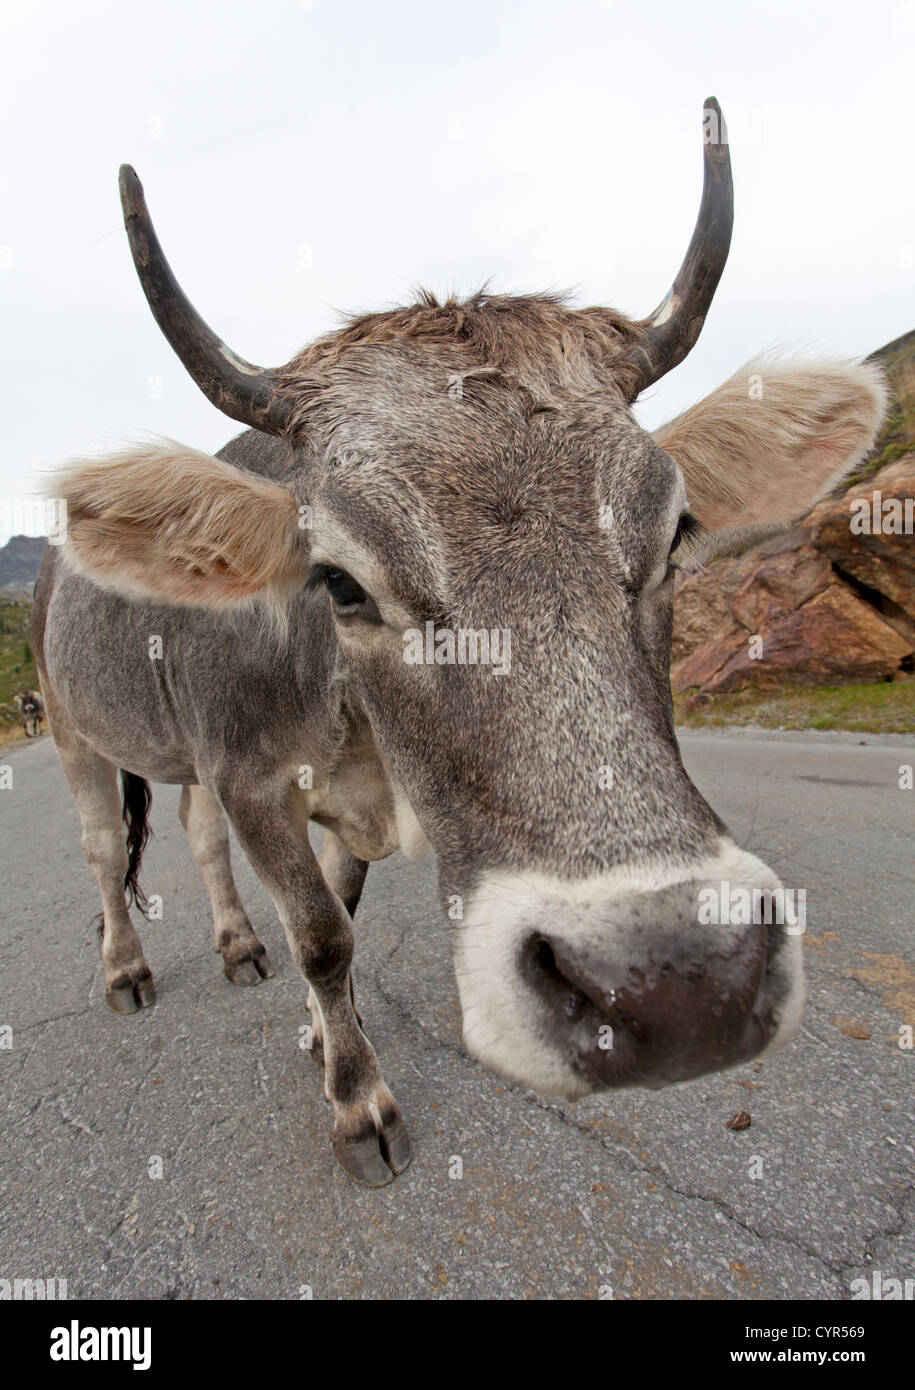 Cow on a street Stock Photo